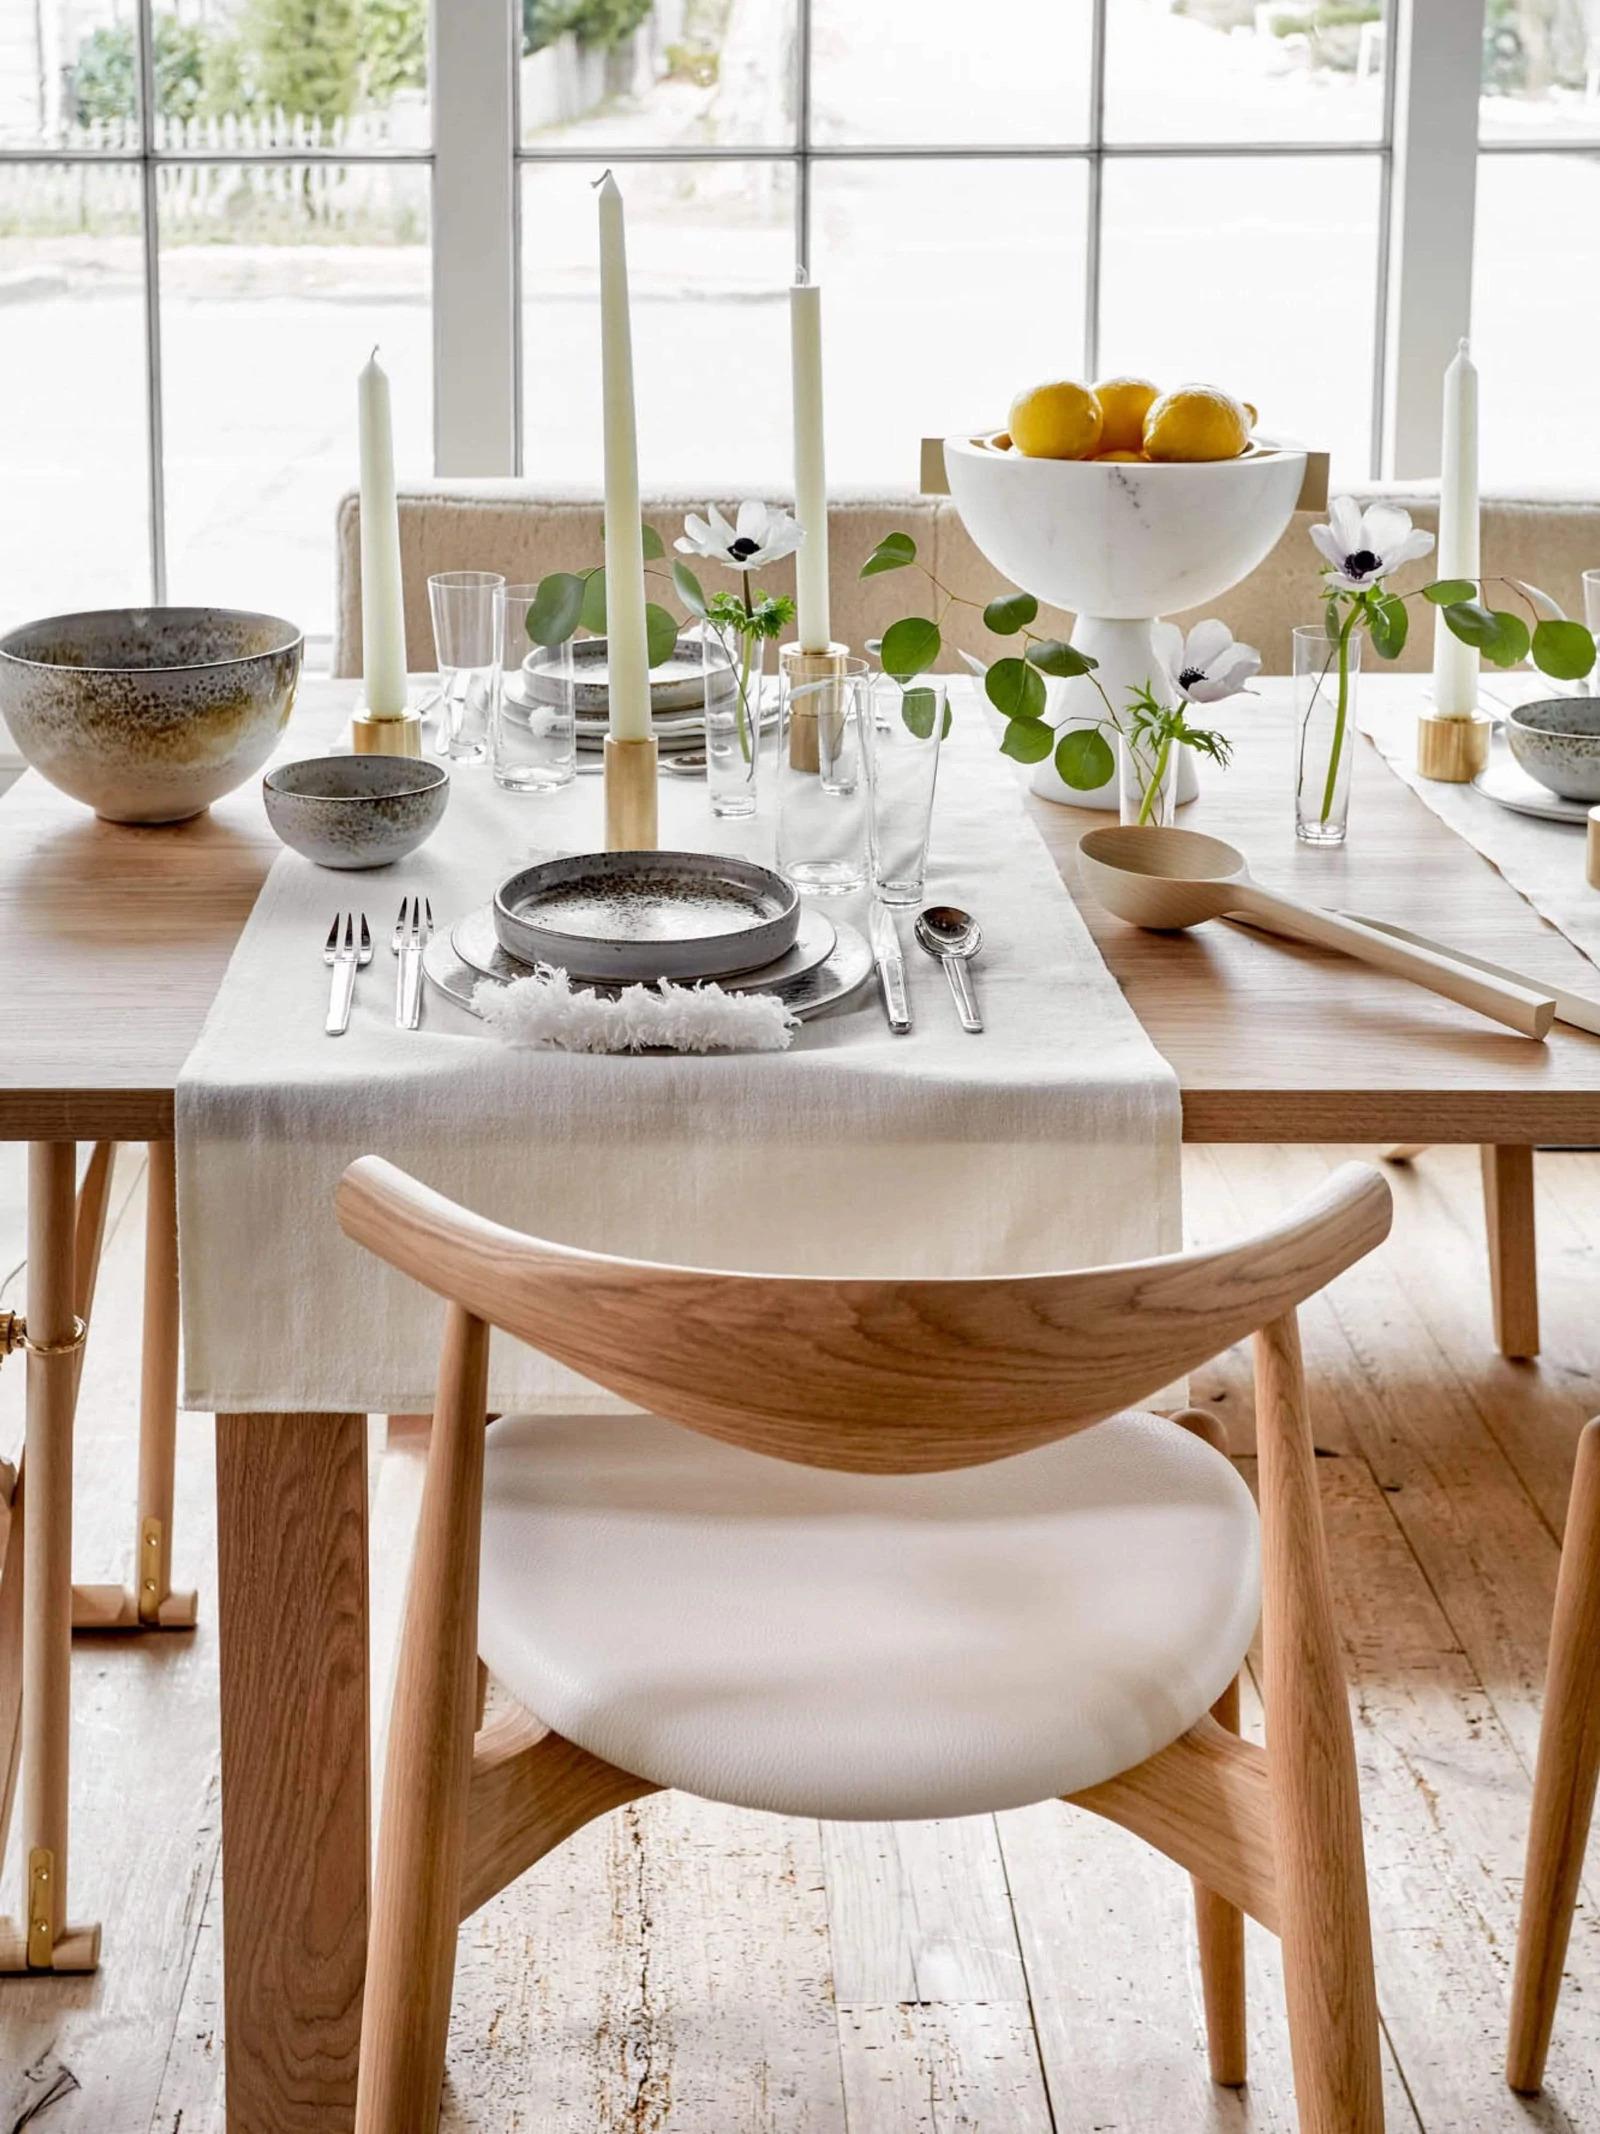 With a long history of amazing craftsmanship, dating back to the beginning of the company in 1908 in Odense, Denmark, Carl Hansen & Son is deeply rooted in the Danish Design Movement combining superior manufacturing with world renowned designs by